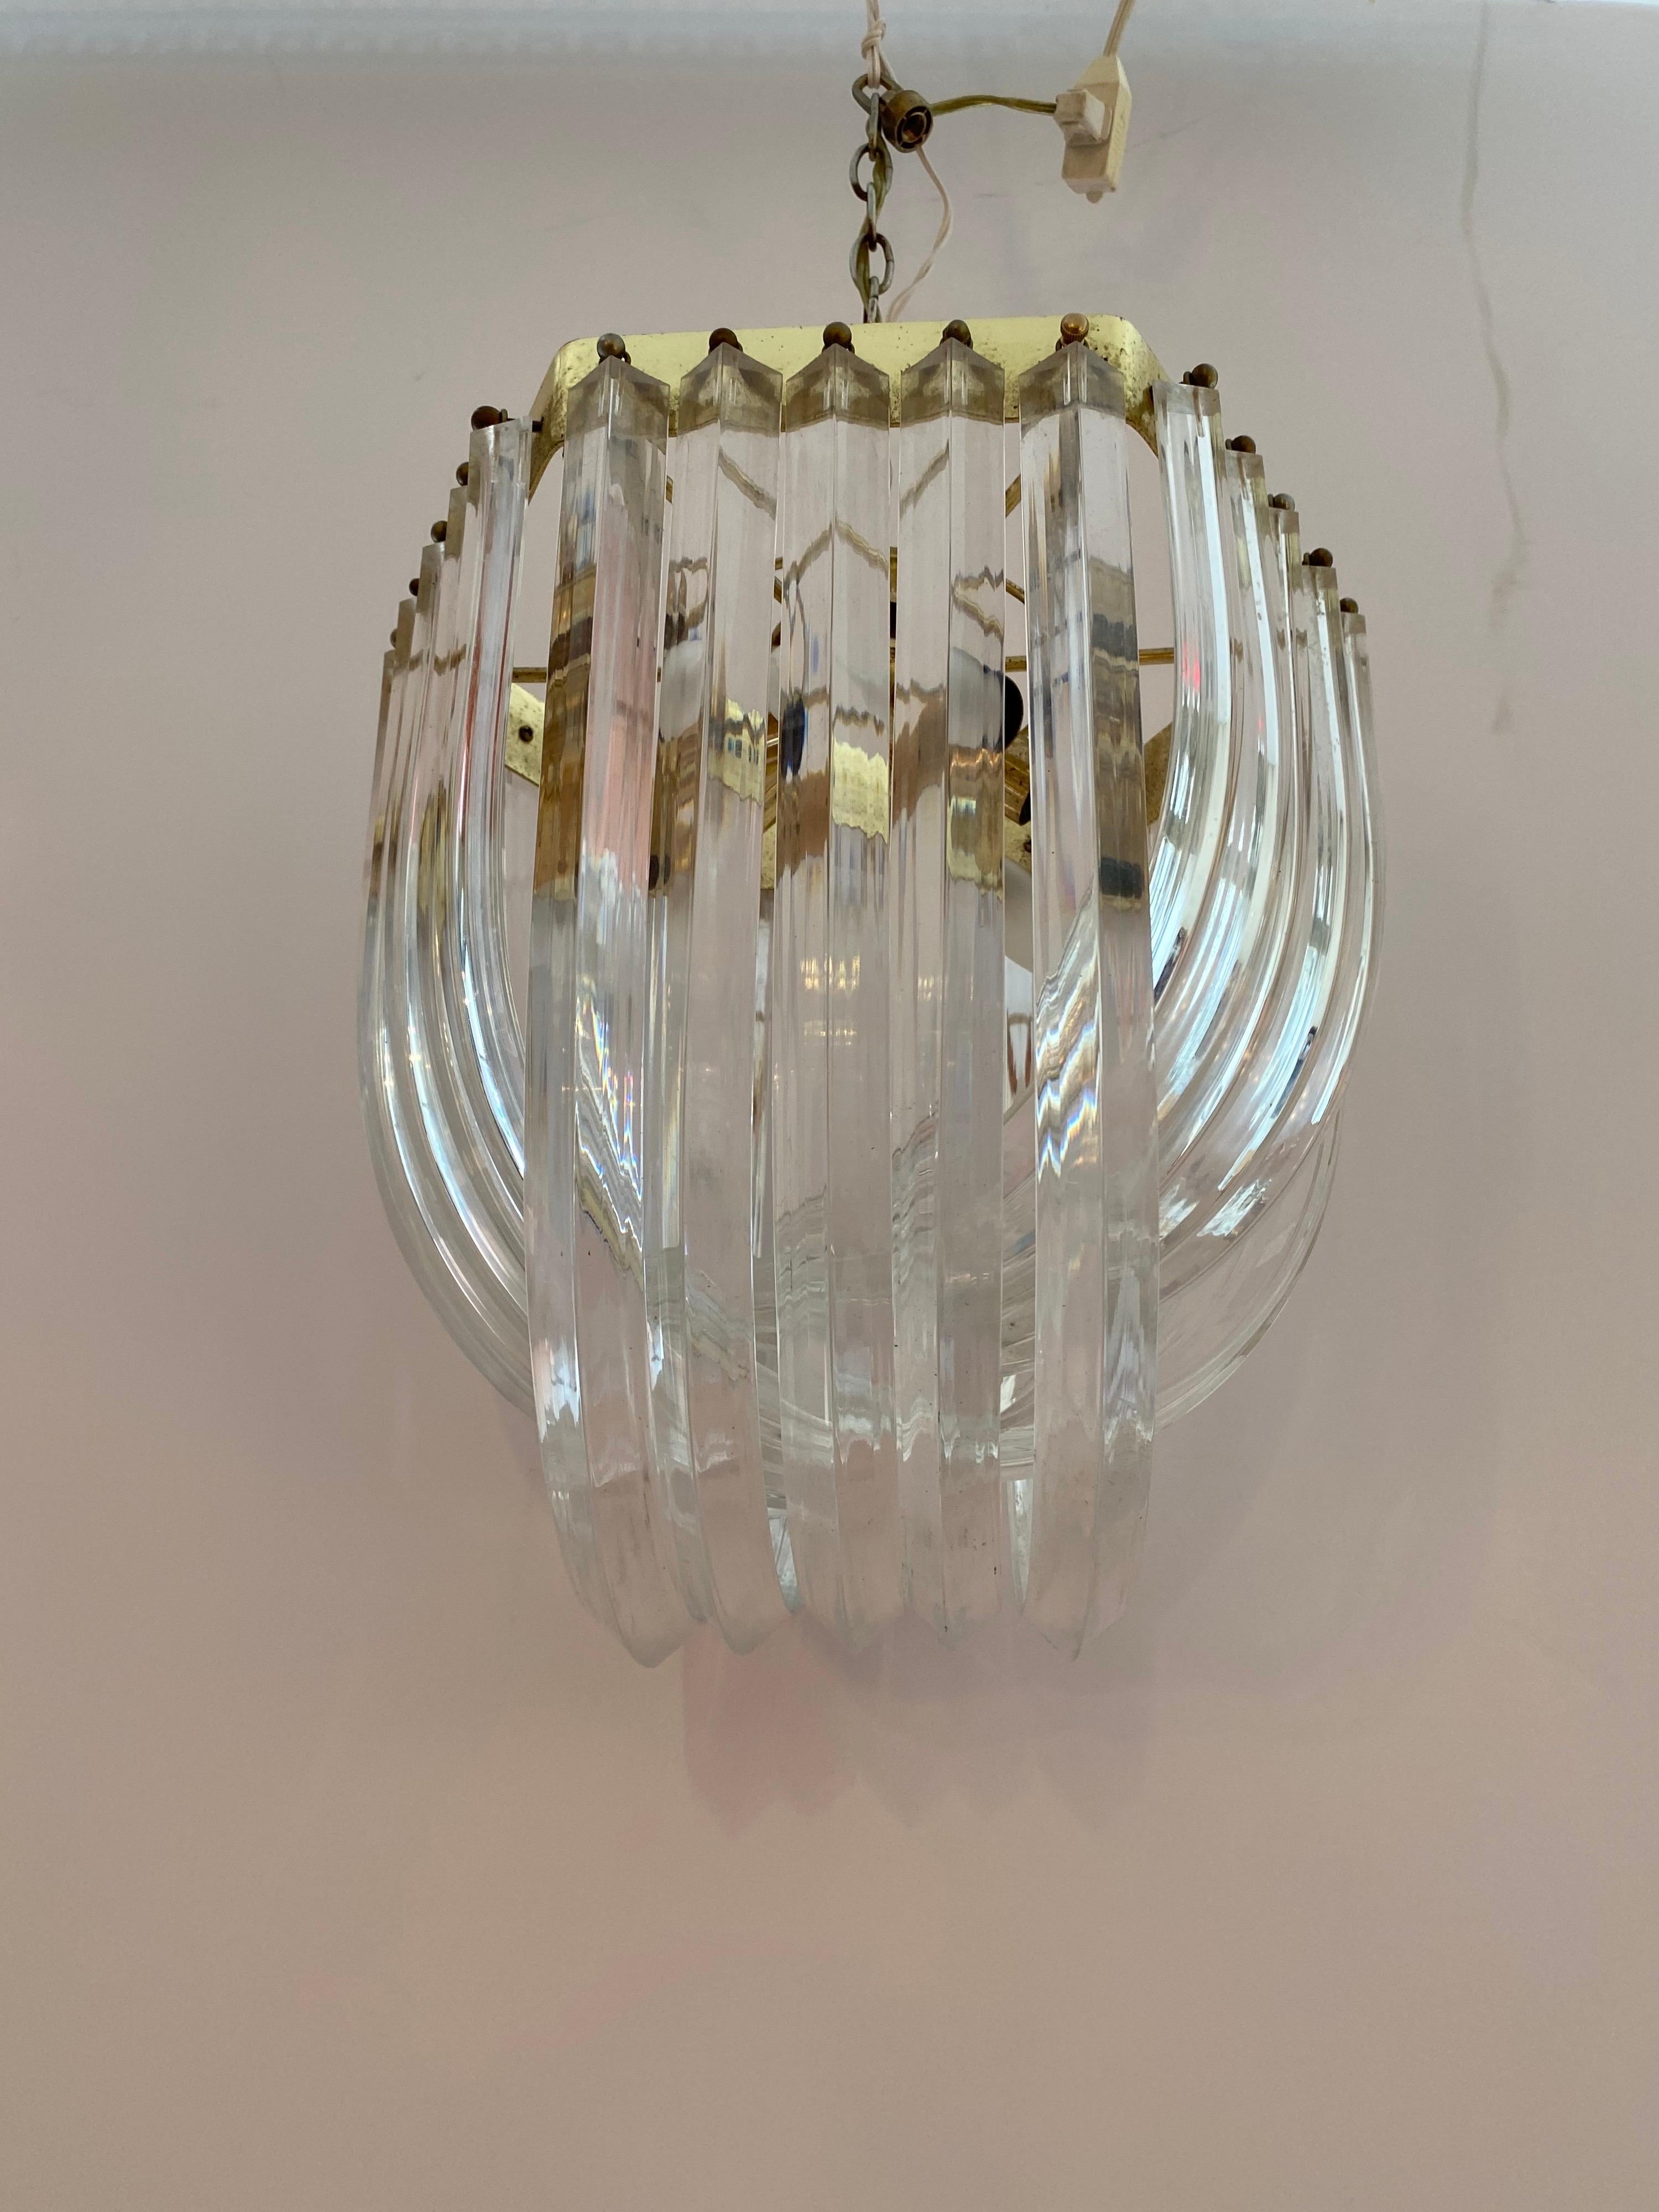 Molded Lucite fixture with cascading bands. Brass frame holds 